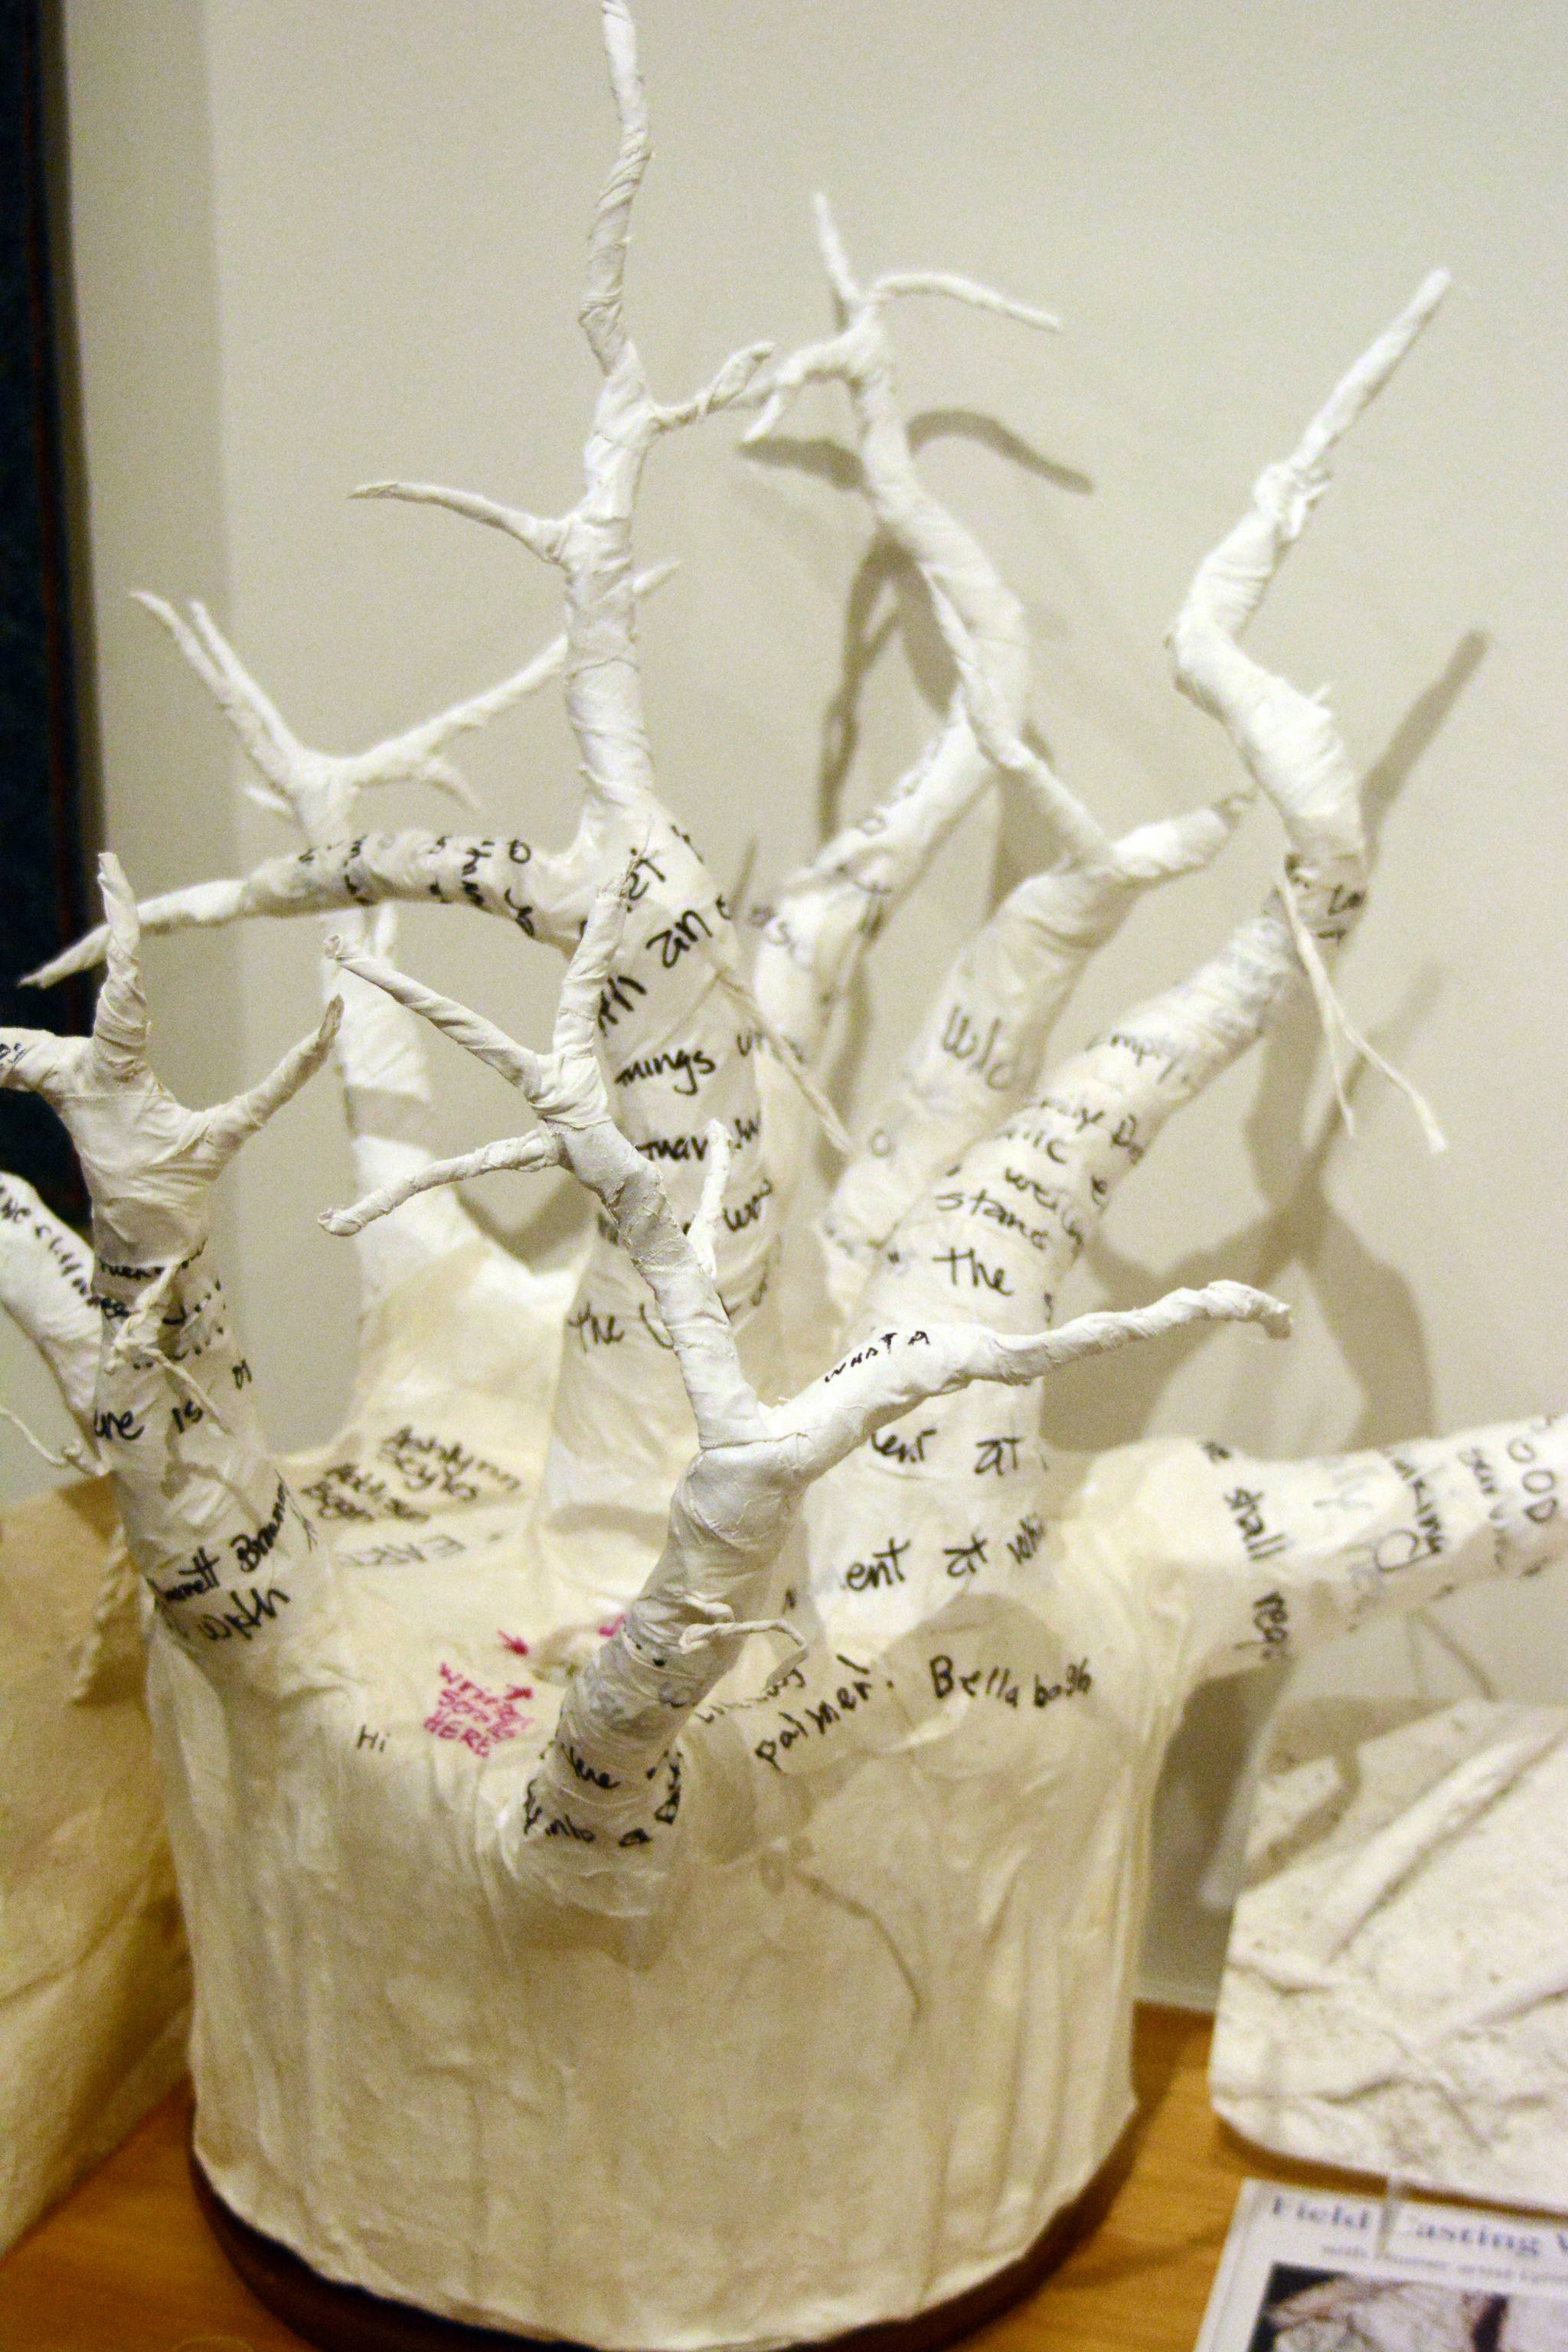 Lynn Marie Naden’s sculpture at the Pratt Museum invites visitors to submit thoughts on the subject of “Root,” write them on a piece of paper and put it in the sculpture. The slips of paper ultimately will be used in a larger sculpture she will create. (Photo by Michael Armstrong/Homer News)